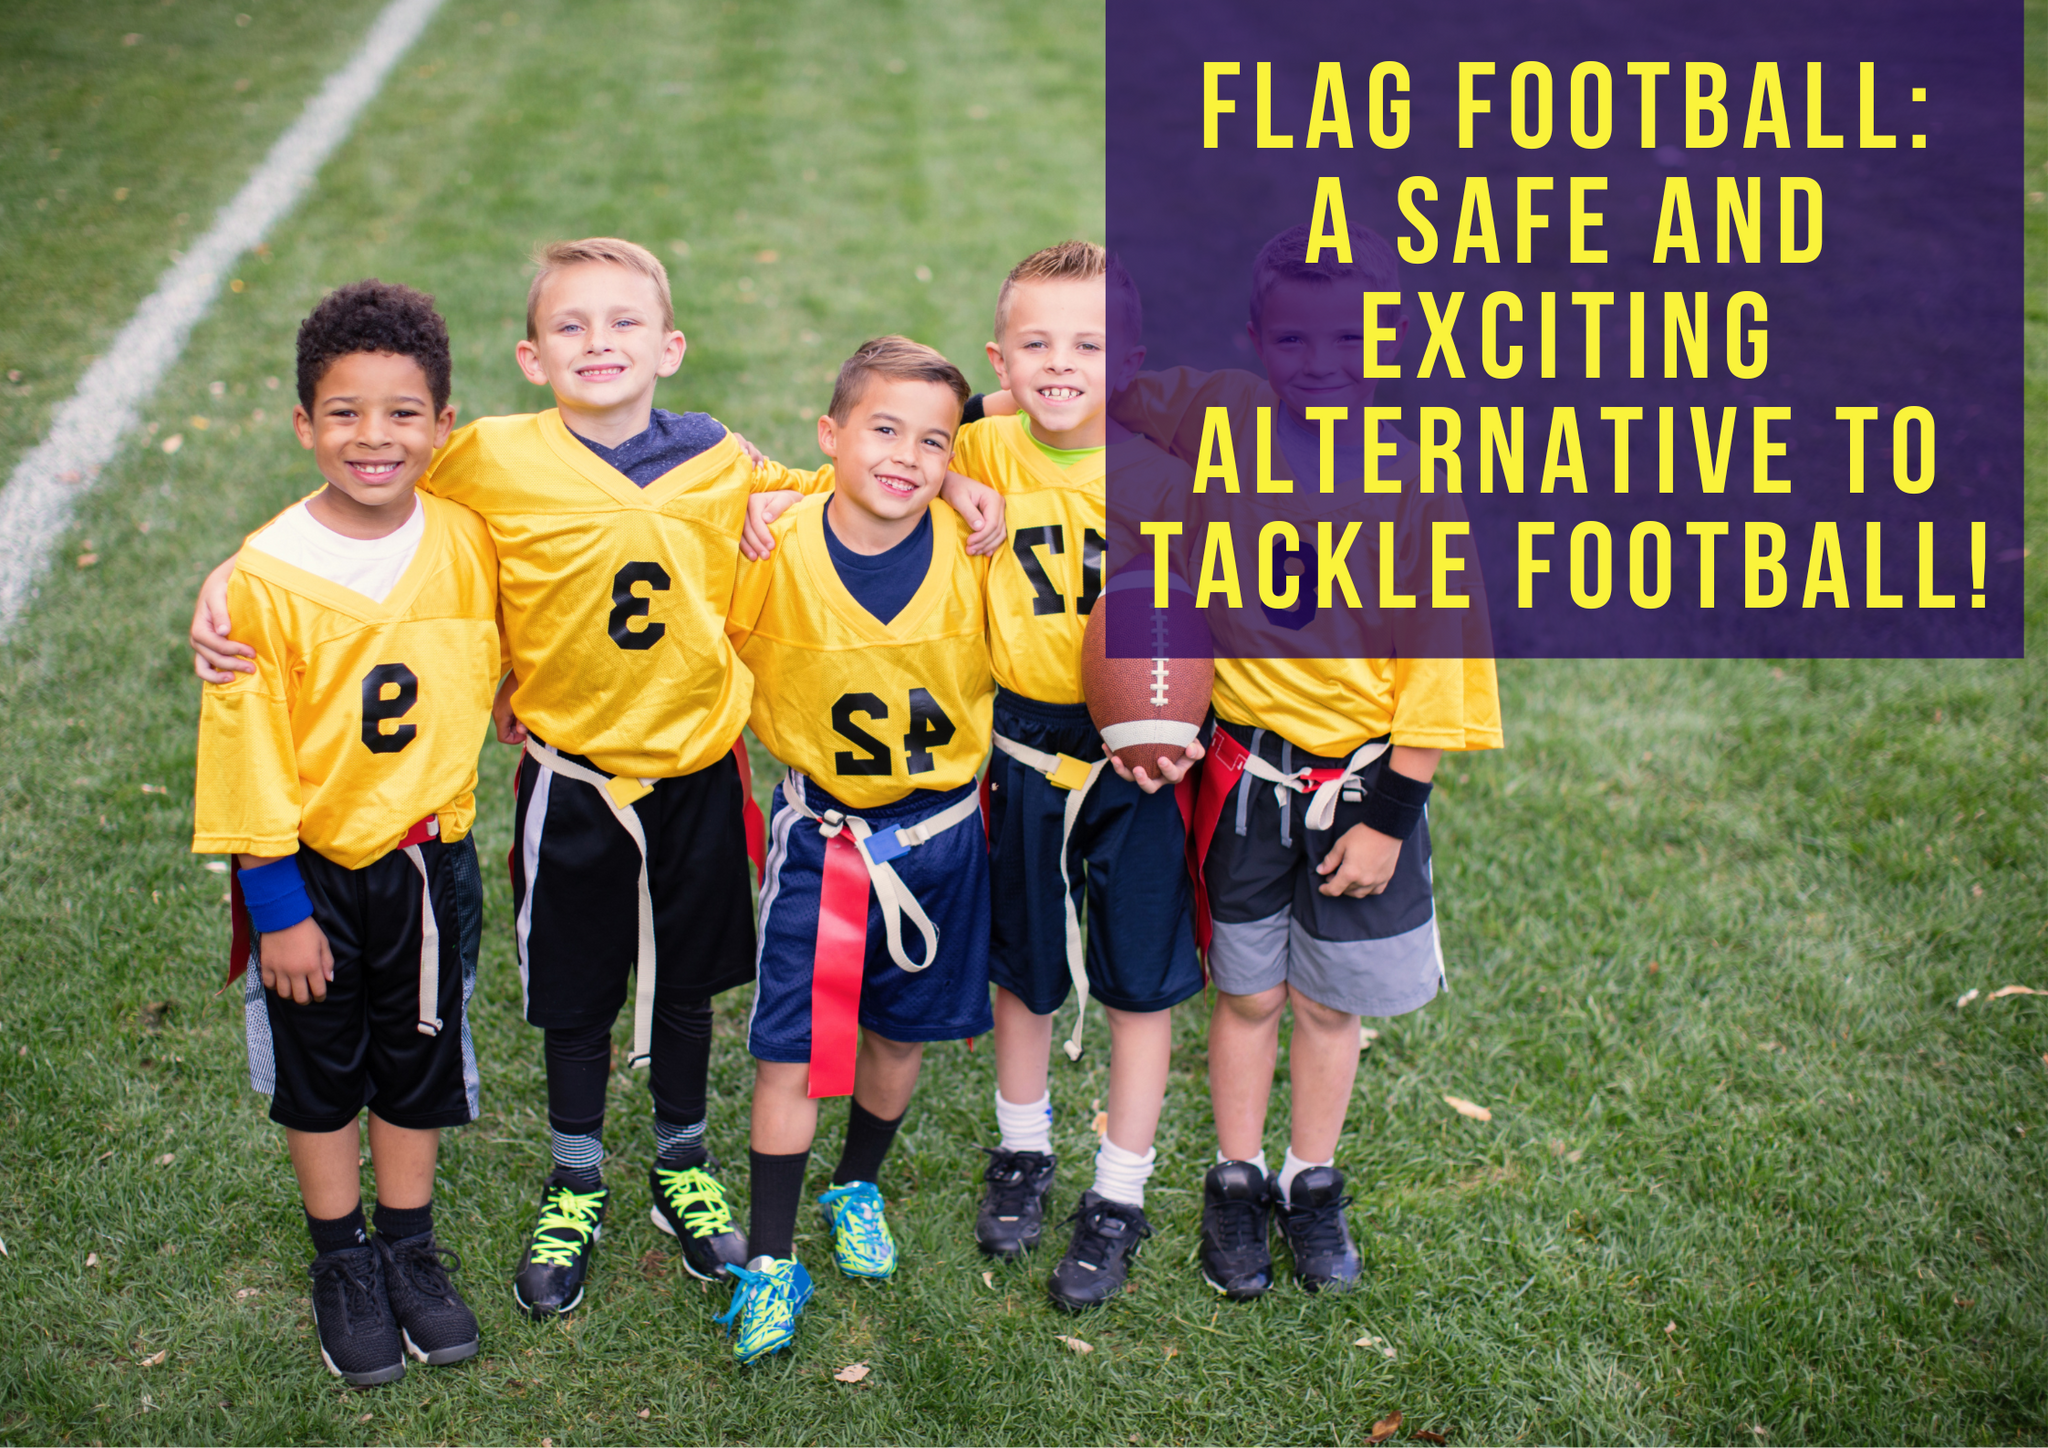 Flag Football: A Safe and Exciting Alternative to Tackle Football